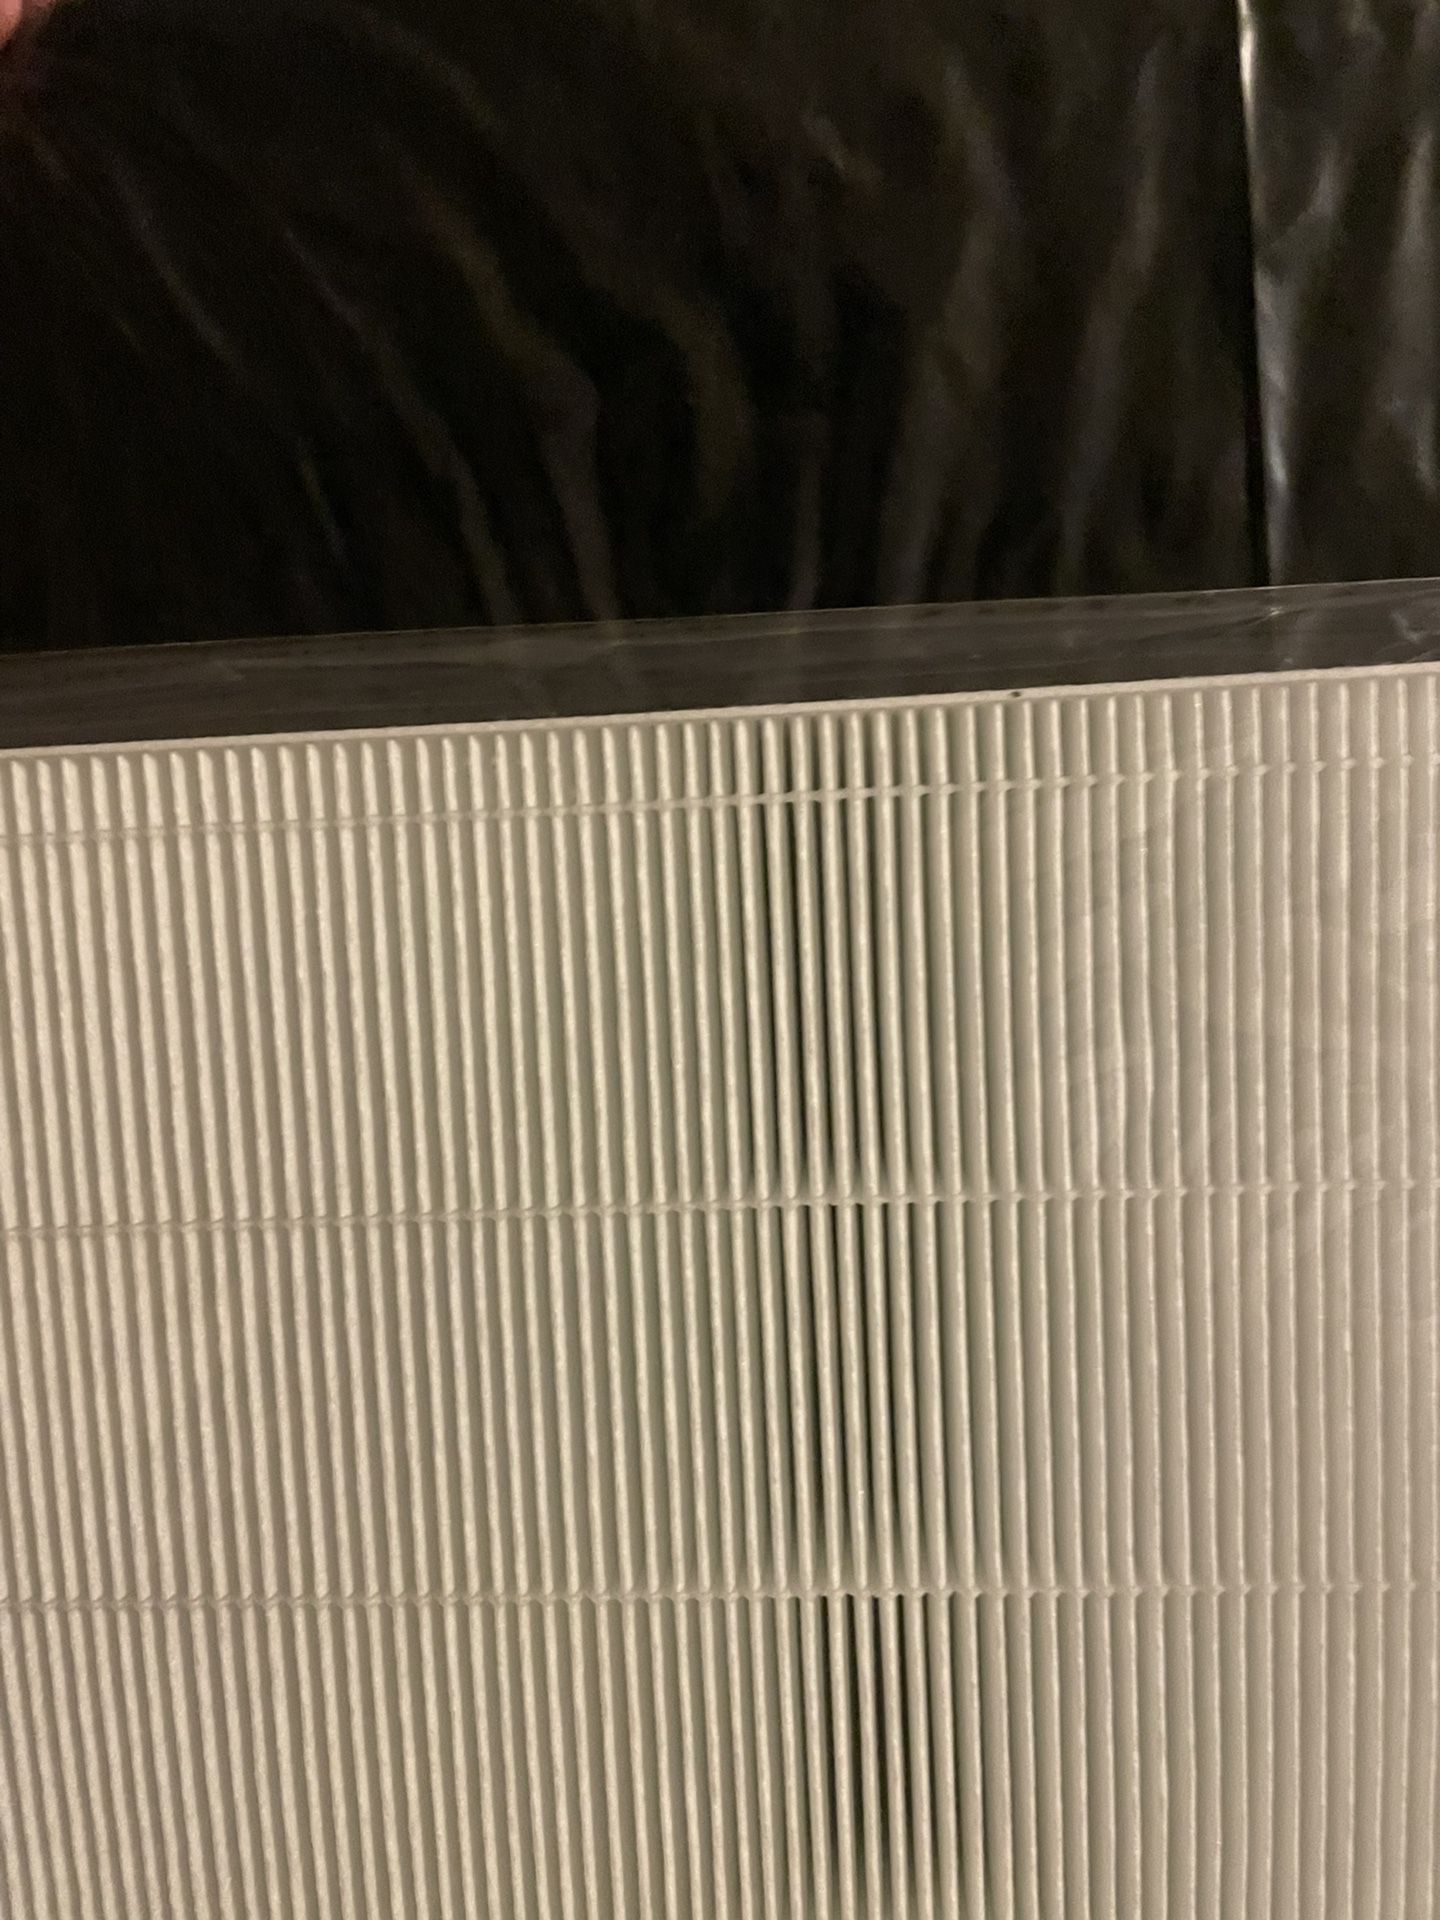 Conway 1 Yr Replacement Filter Pack